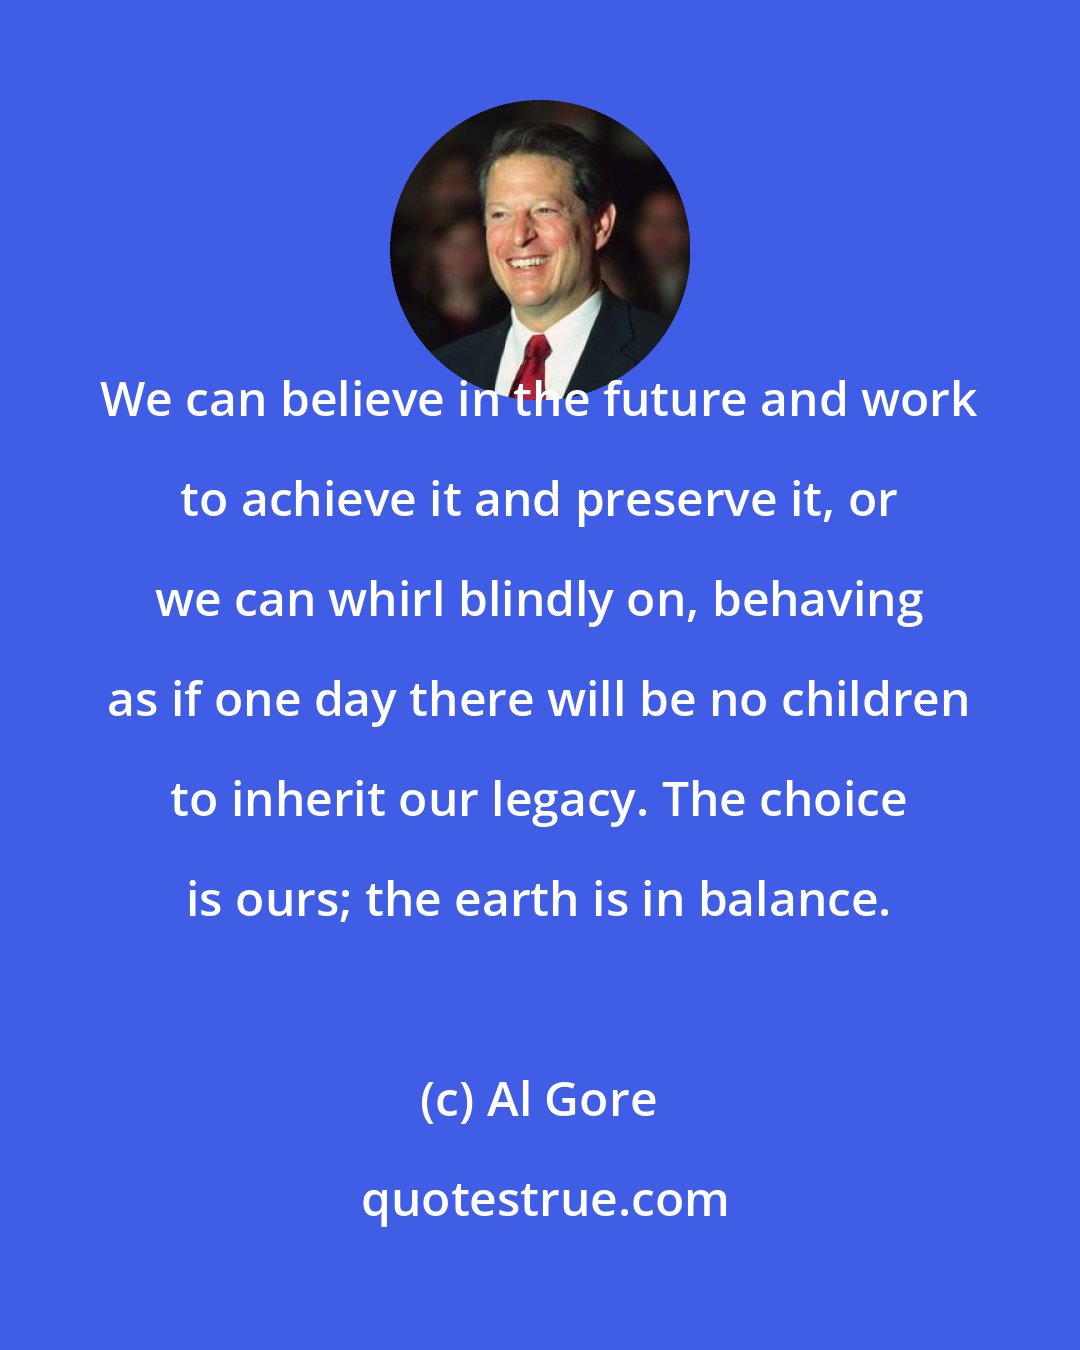 Al Gore: We can believe in the future and work to achieve it and preserve it, or we can whirl blindly on, behaving as if one day there will be no children to inherit our legacy. The choice is ours; the earth is in balance.